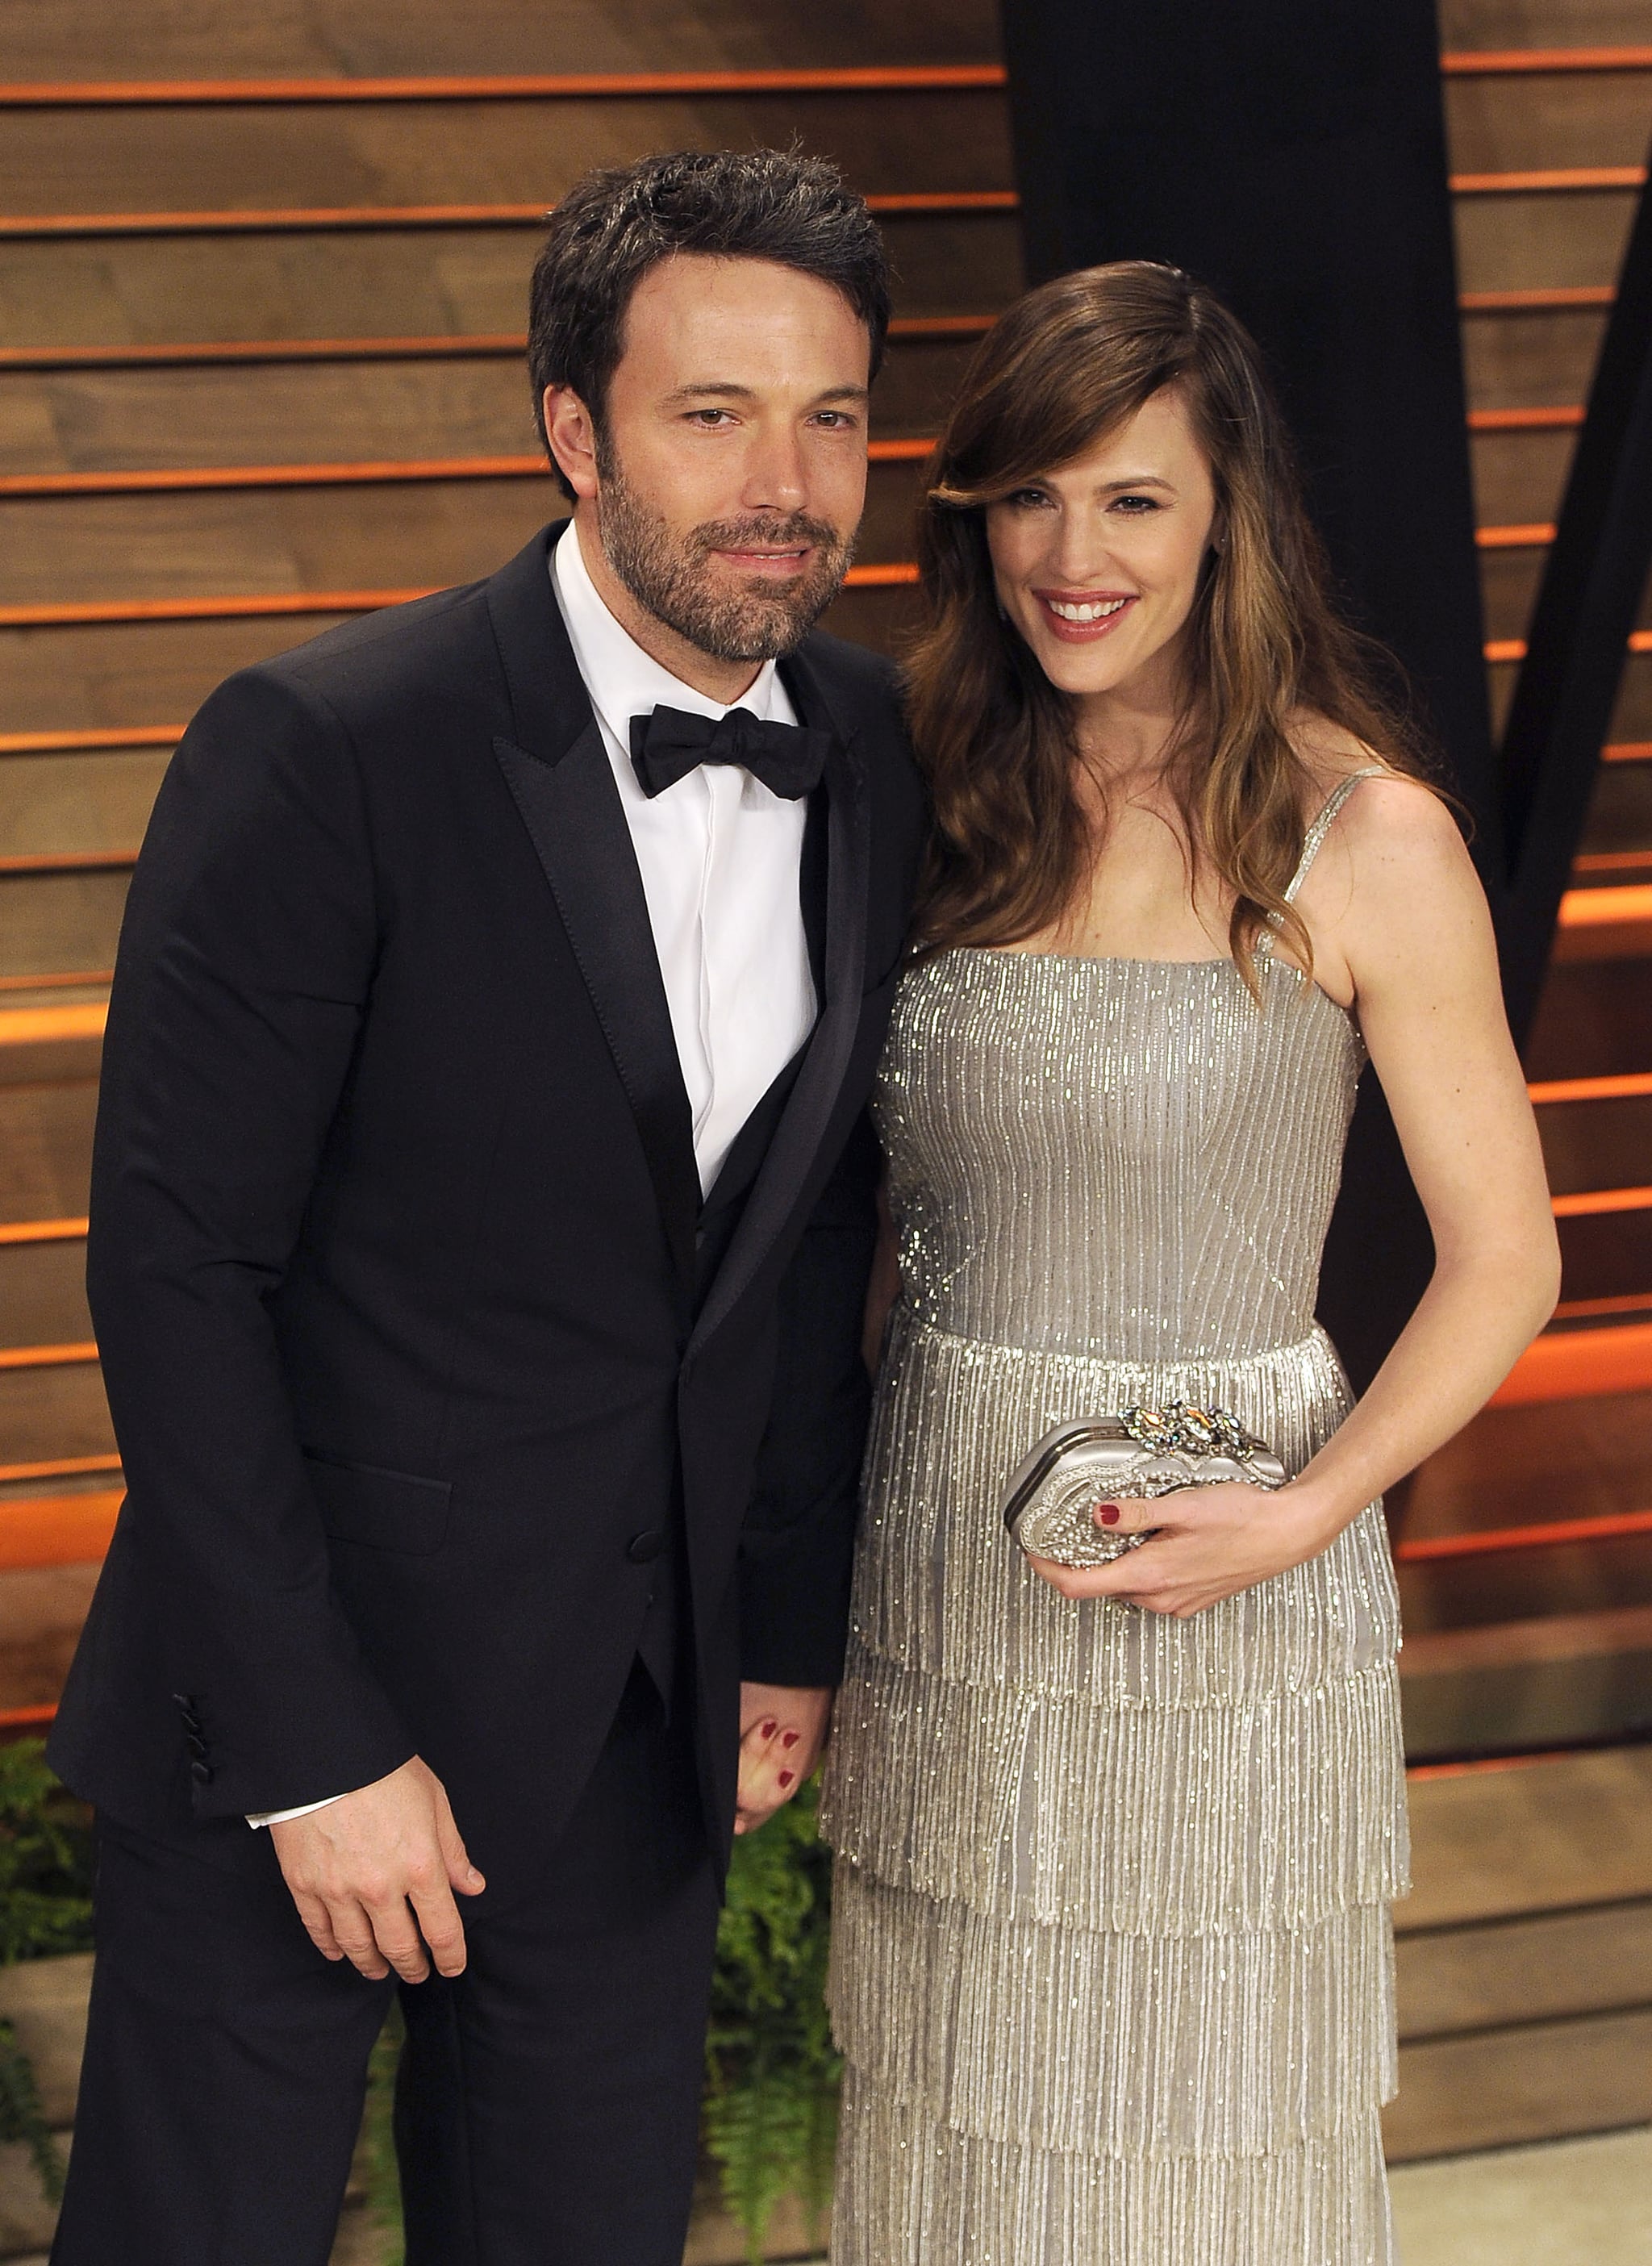 WEST HOLLYWOOD, CA - MARCH 02:  Actor Ben Affleck and wife Jennifer Garner arrive at the 2014 Vanity Fair Oscar Party Hosted By Graydon Carter on March 2, 2014 in West Hollywood, California.  (Photo by C Flanigan/WireImage)